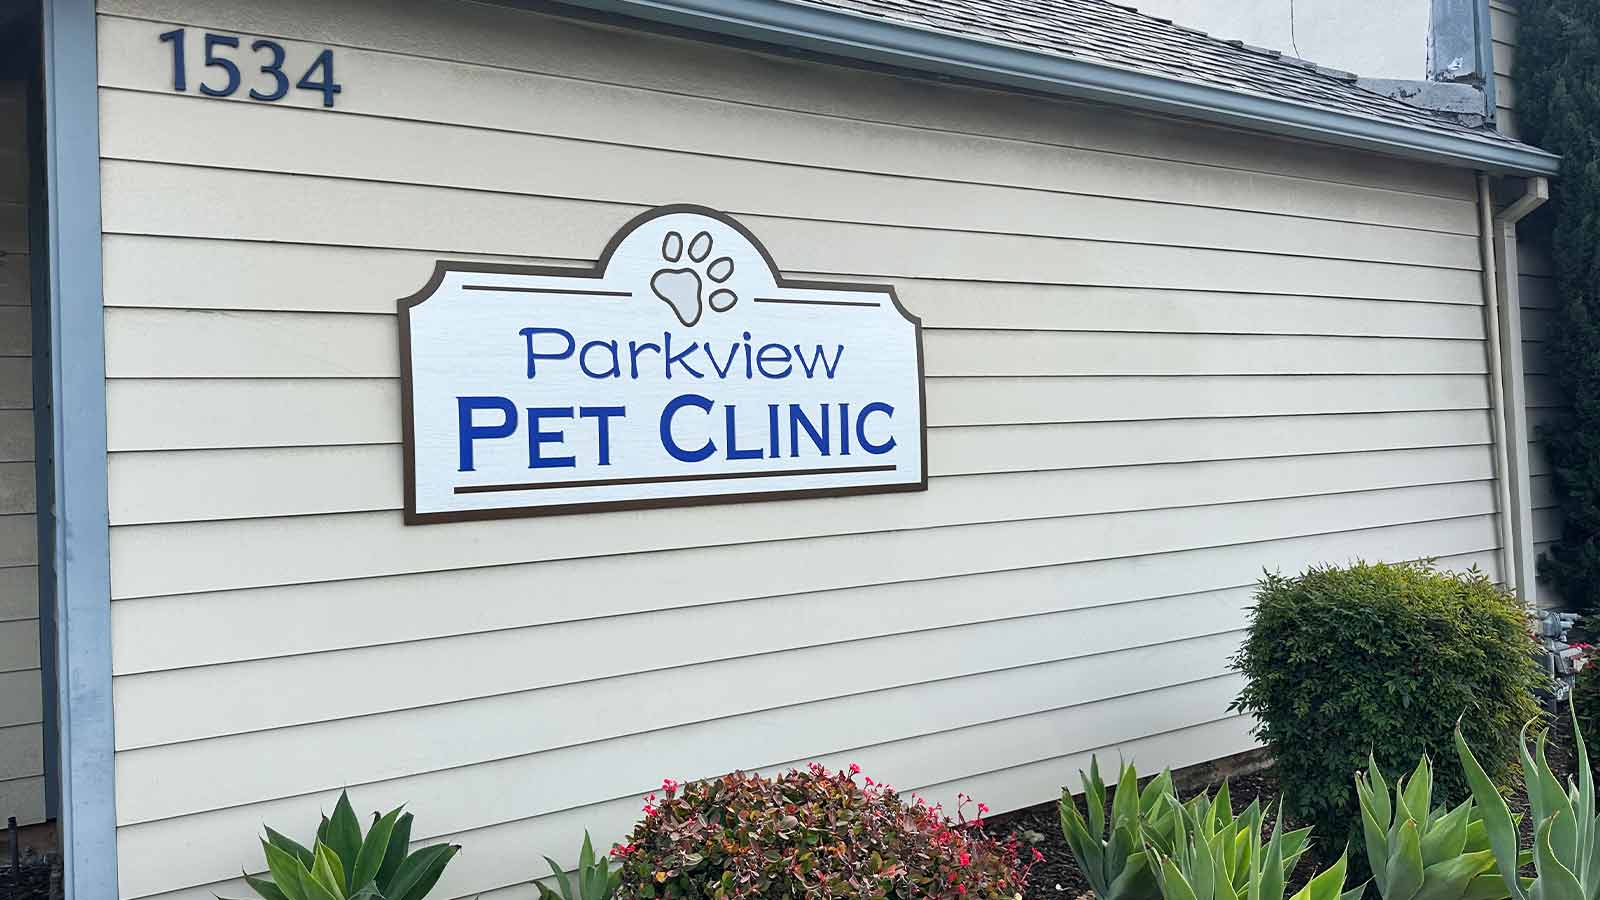 parkview pet clinic outdoor sign installed on the wall